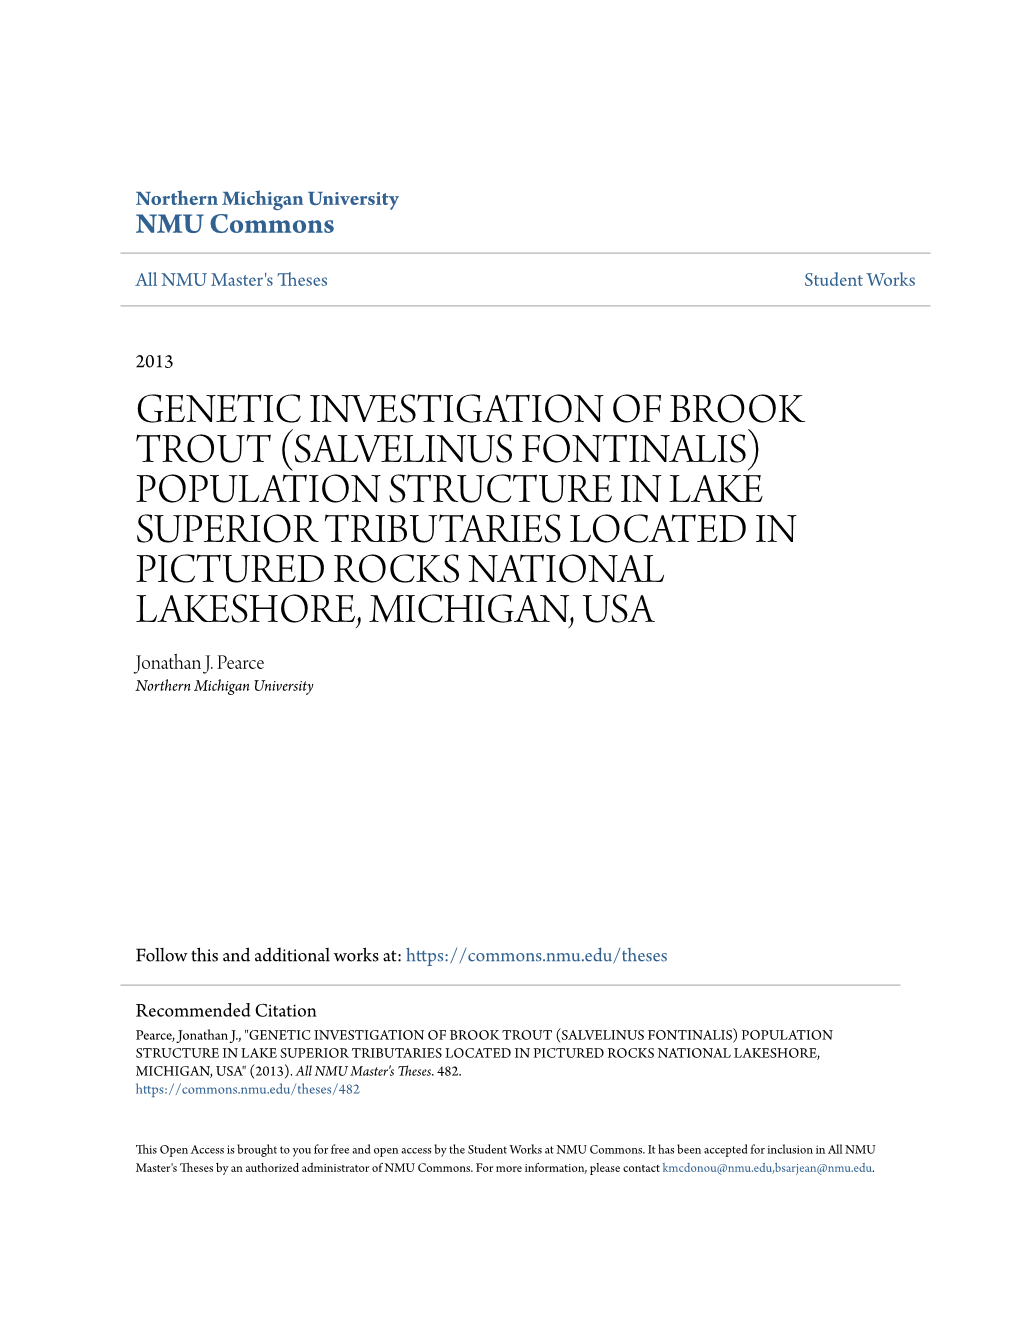 Genetic Investigation of Brook Trout (Salvelinus Fontinalis) Population Structure in Lake Superior Tributaries Located in Pictured